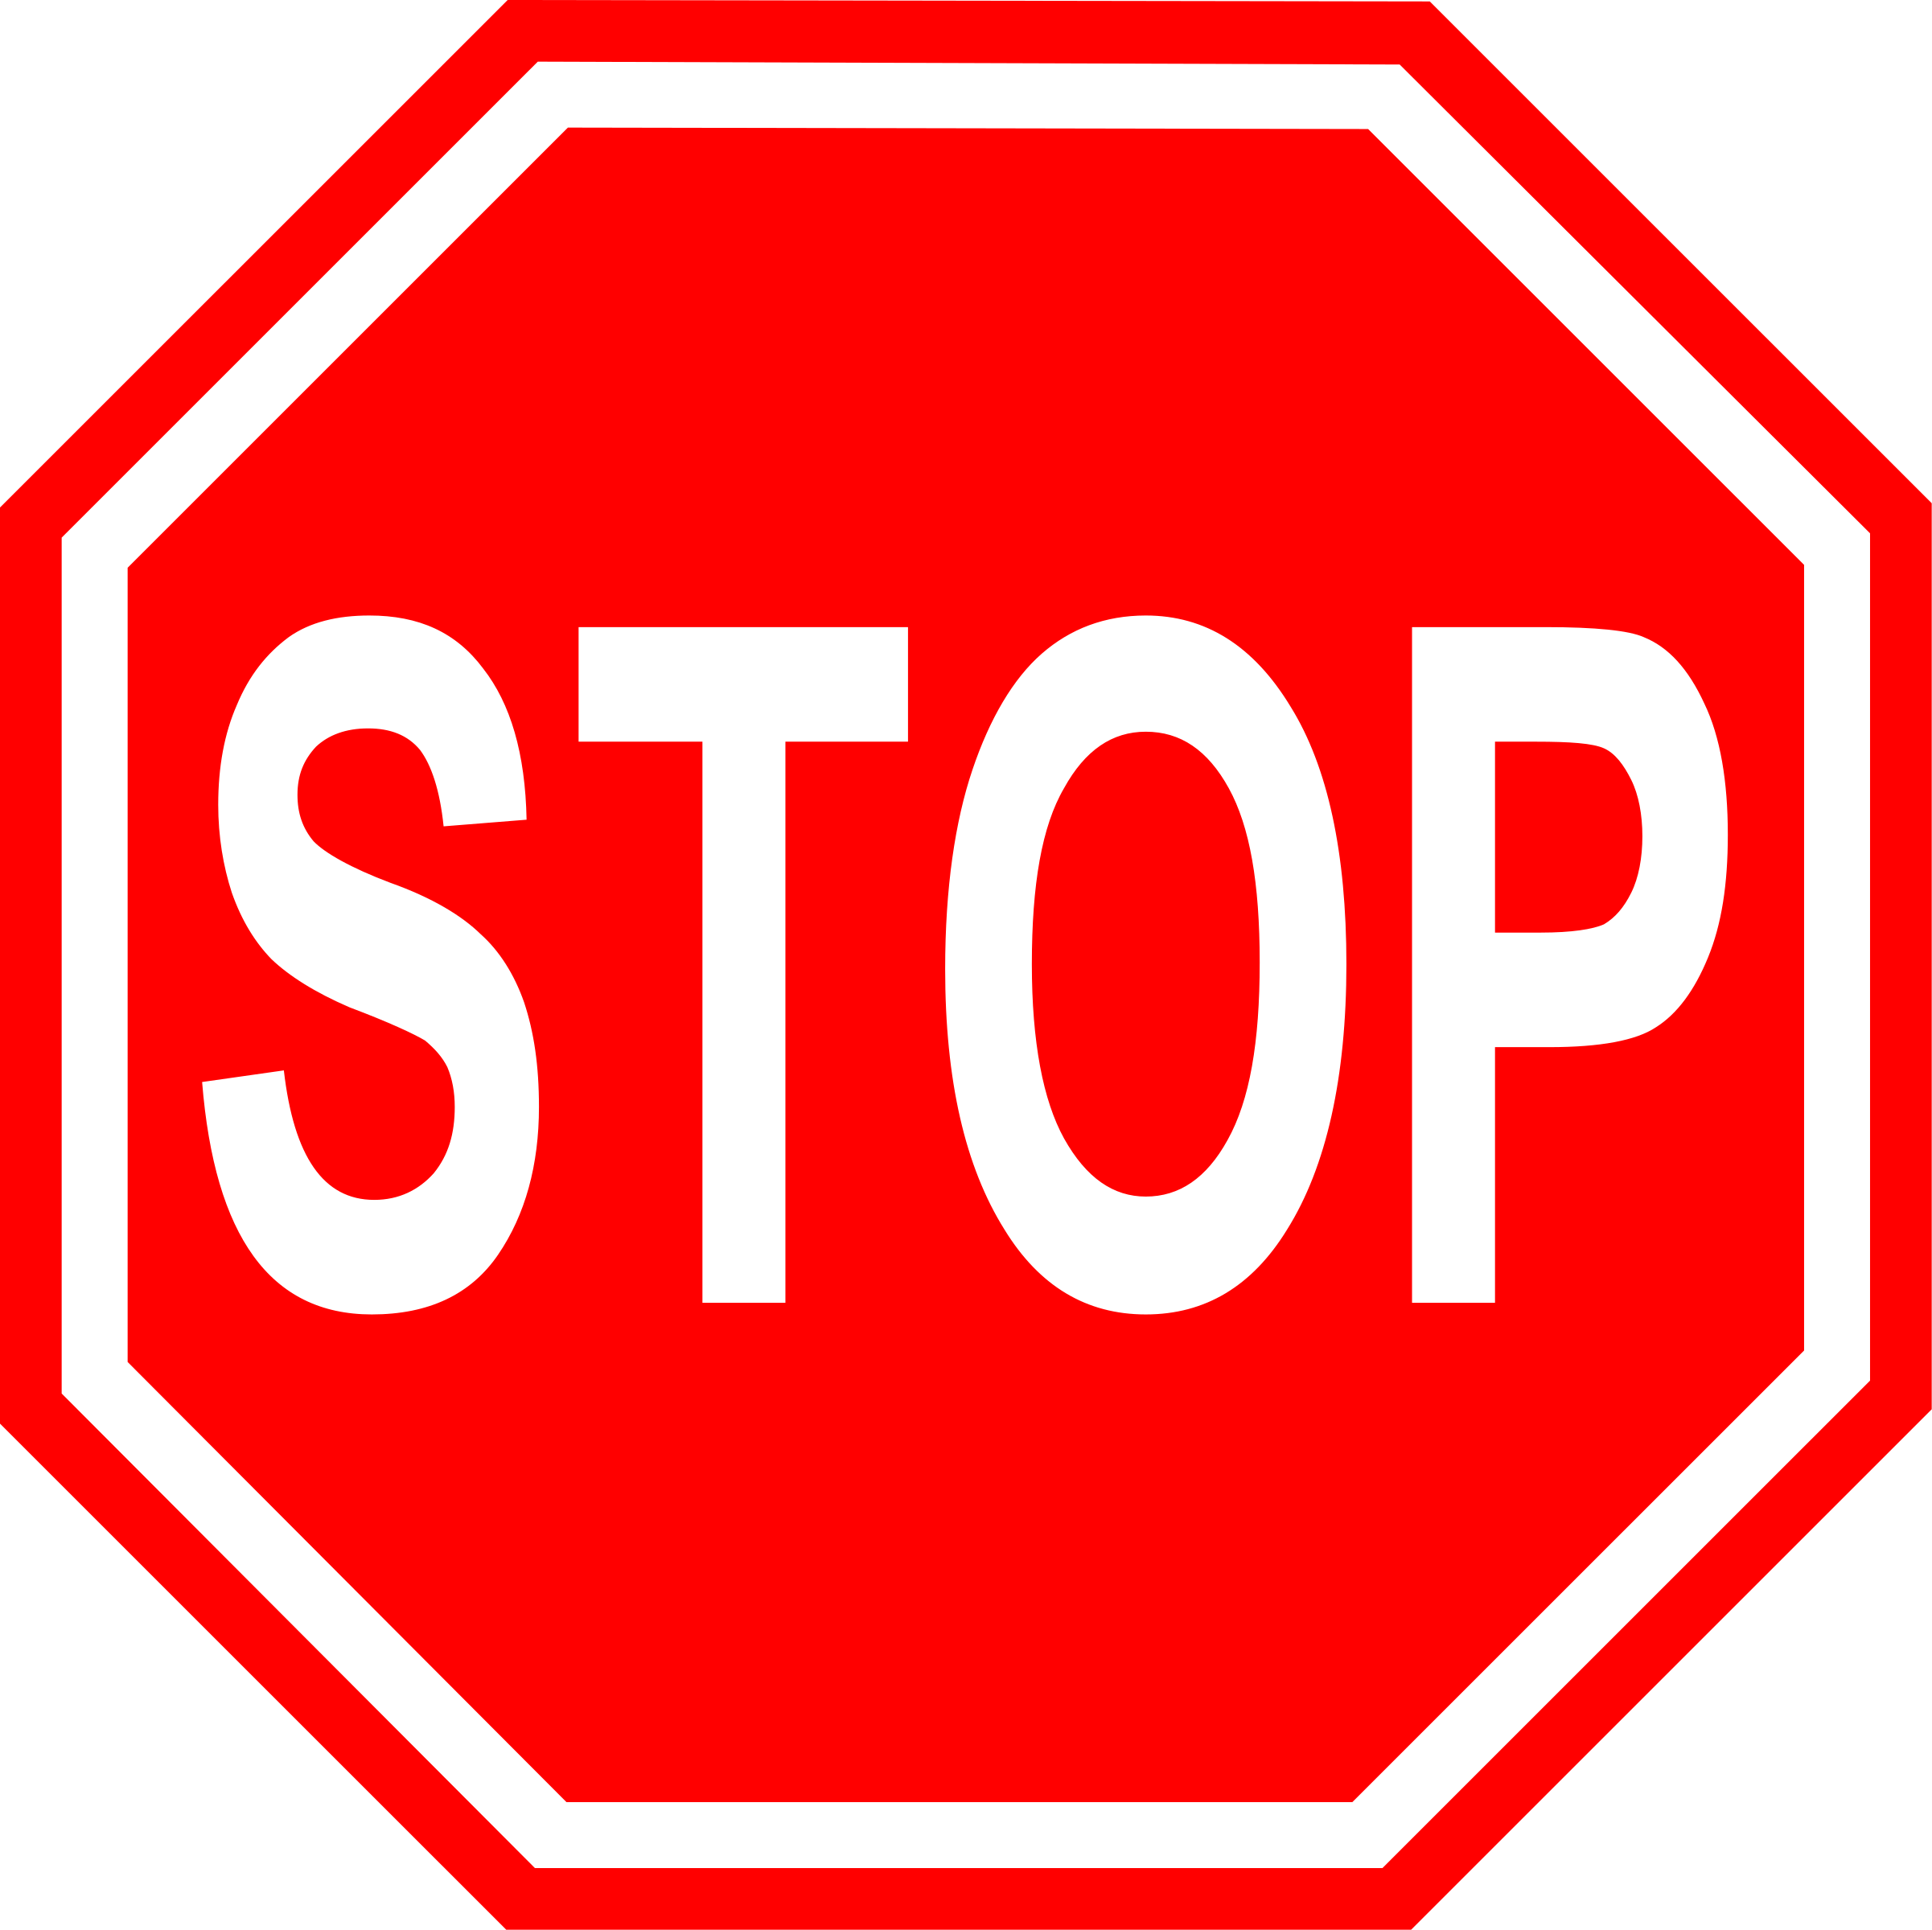 Microsoft Office Clipart Stop Sign - Stop Sign Clip Art Png (2402x2400)